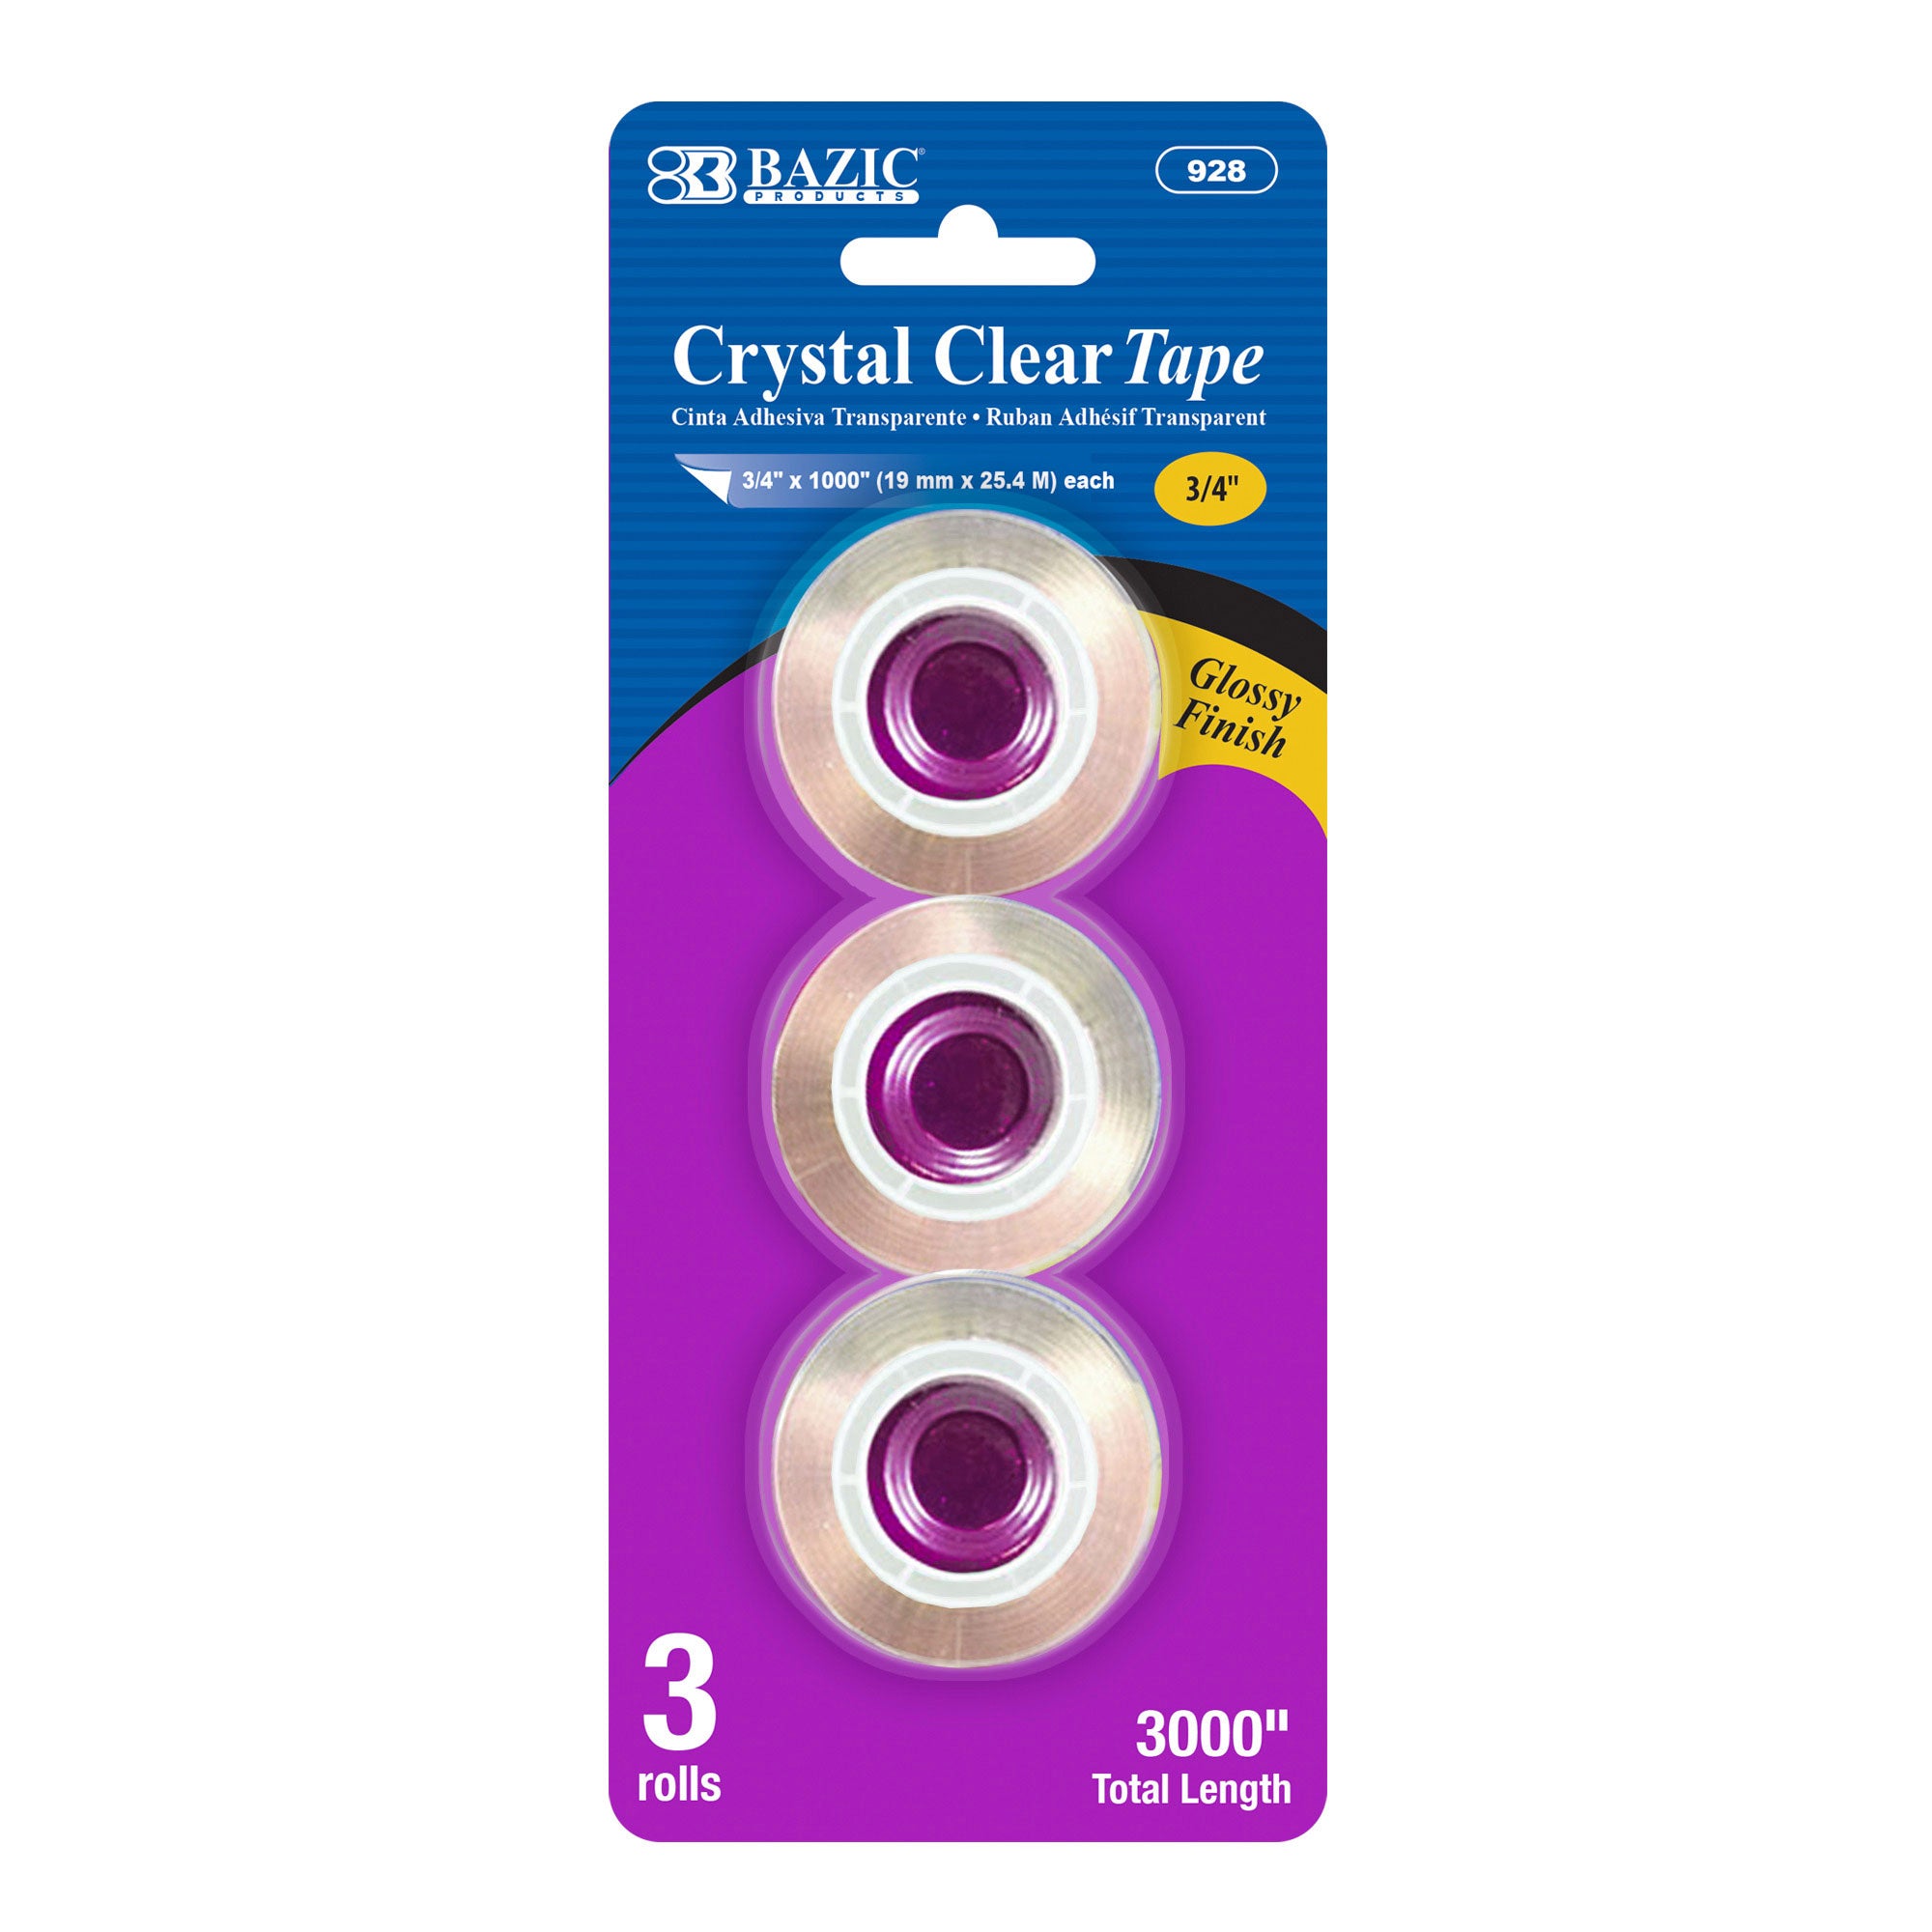  Crystal Clear Tape